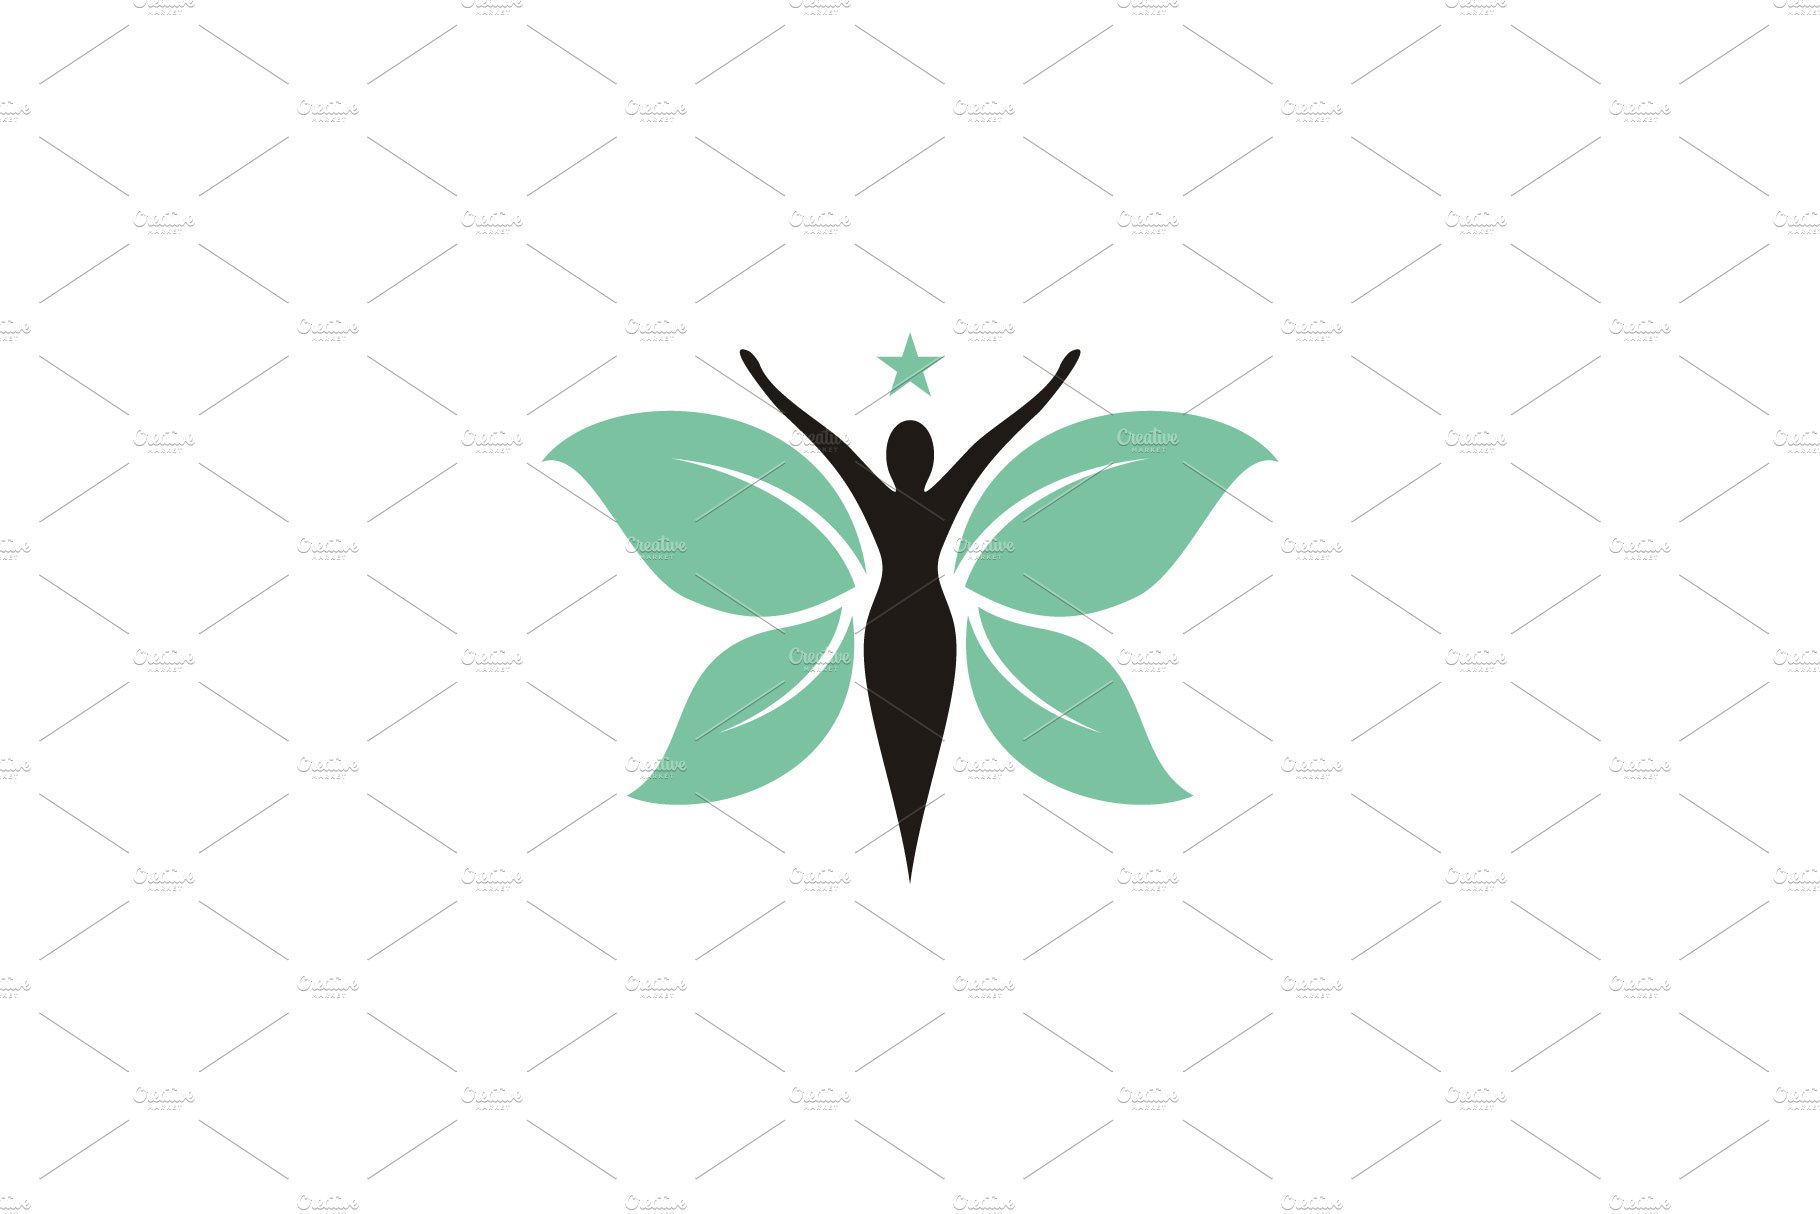 Butterfly Woman with Leaves logo cover image.